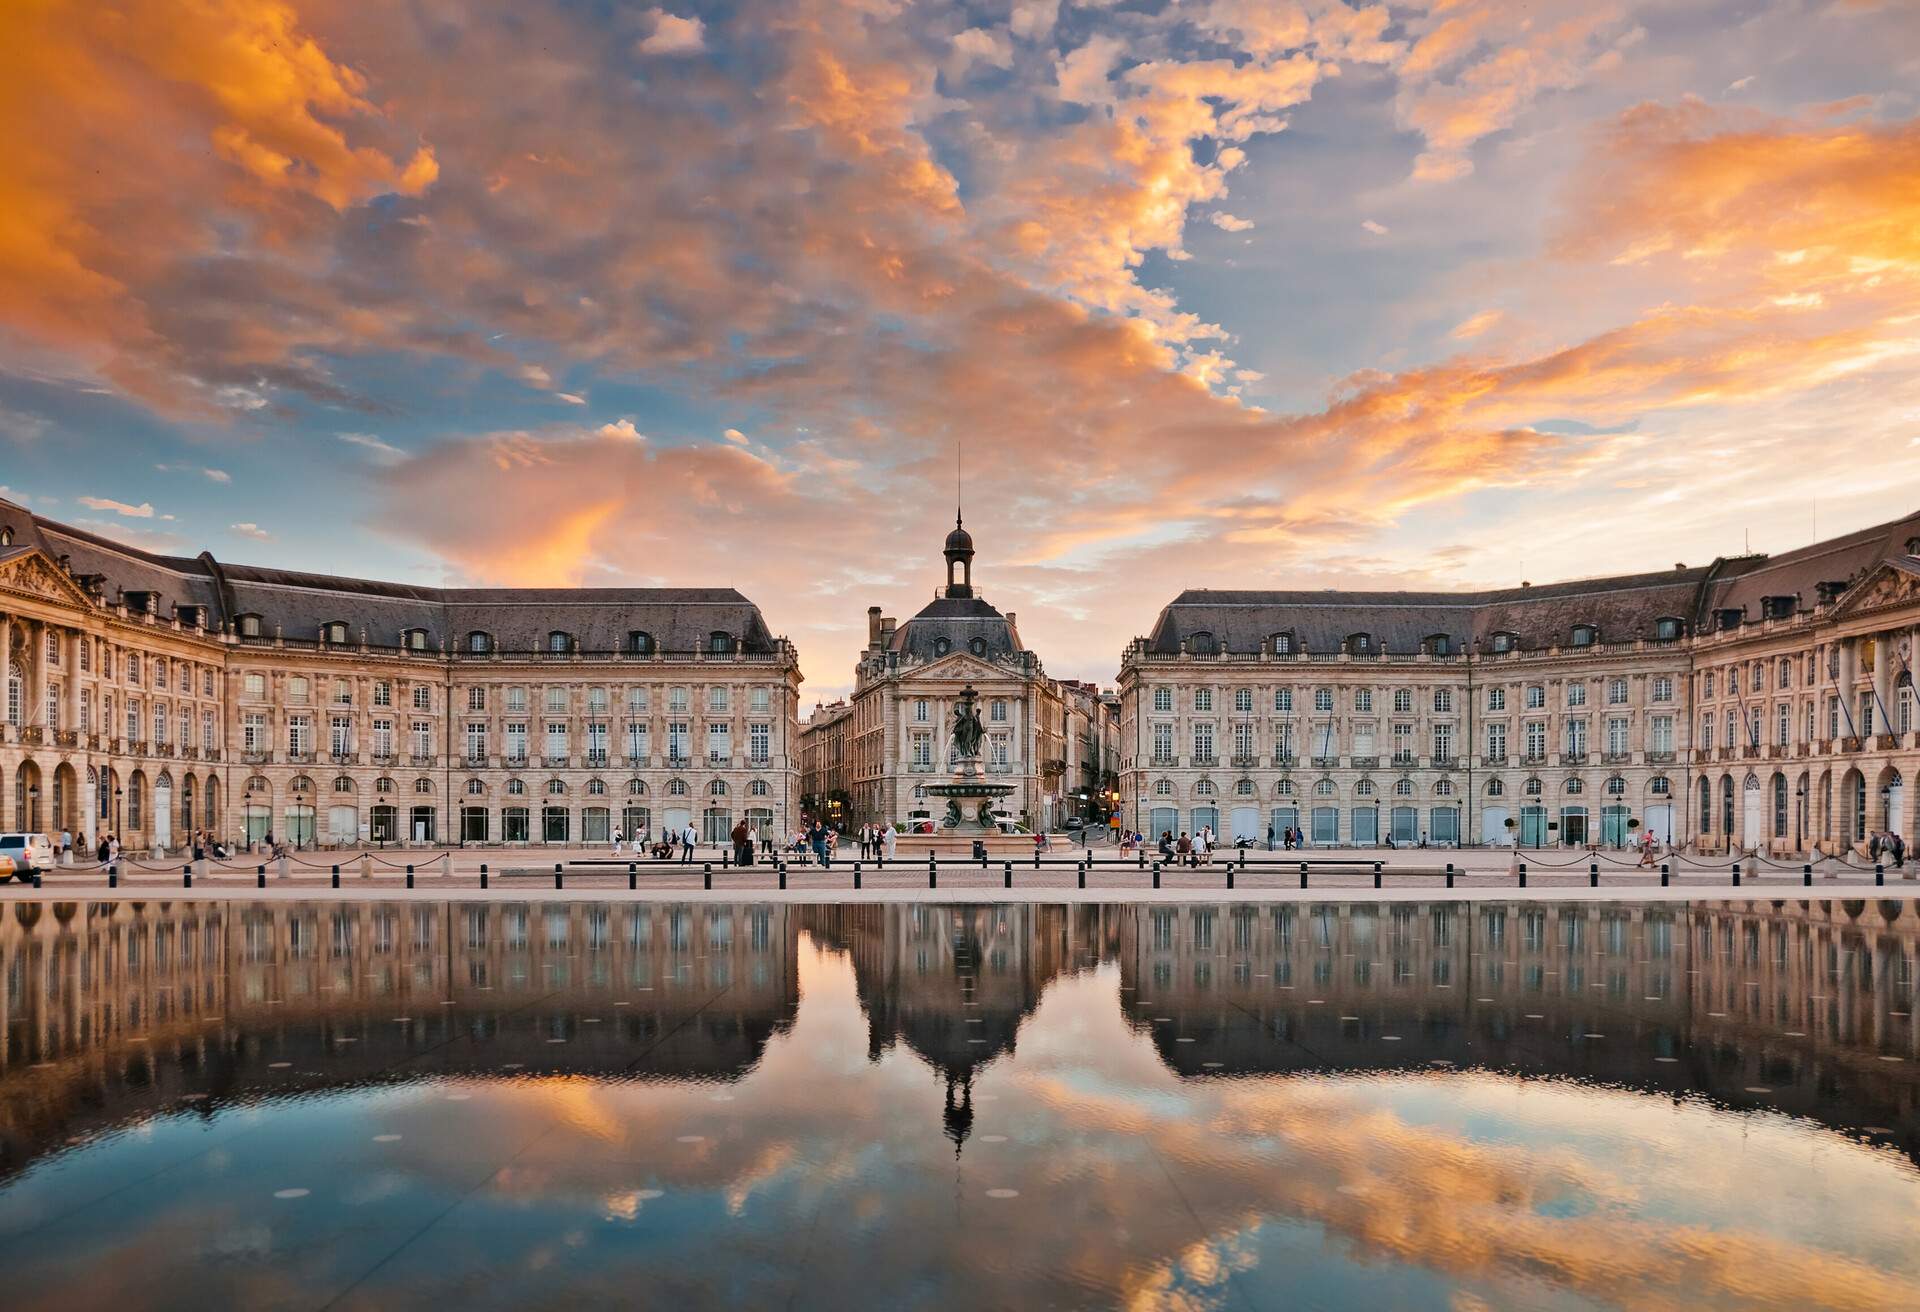 dest_france_bordeaux_shutterstock_124255273_universal_within-usage-period_25516